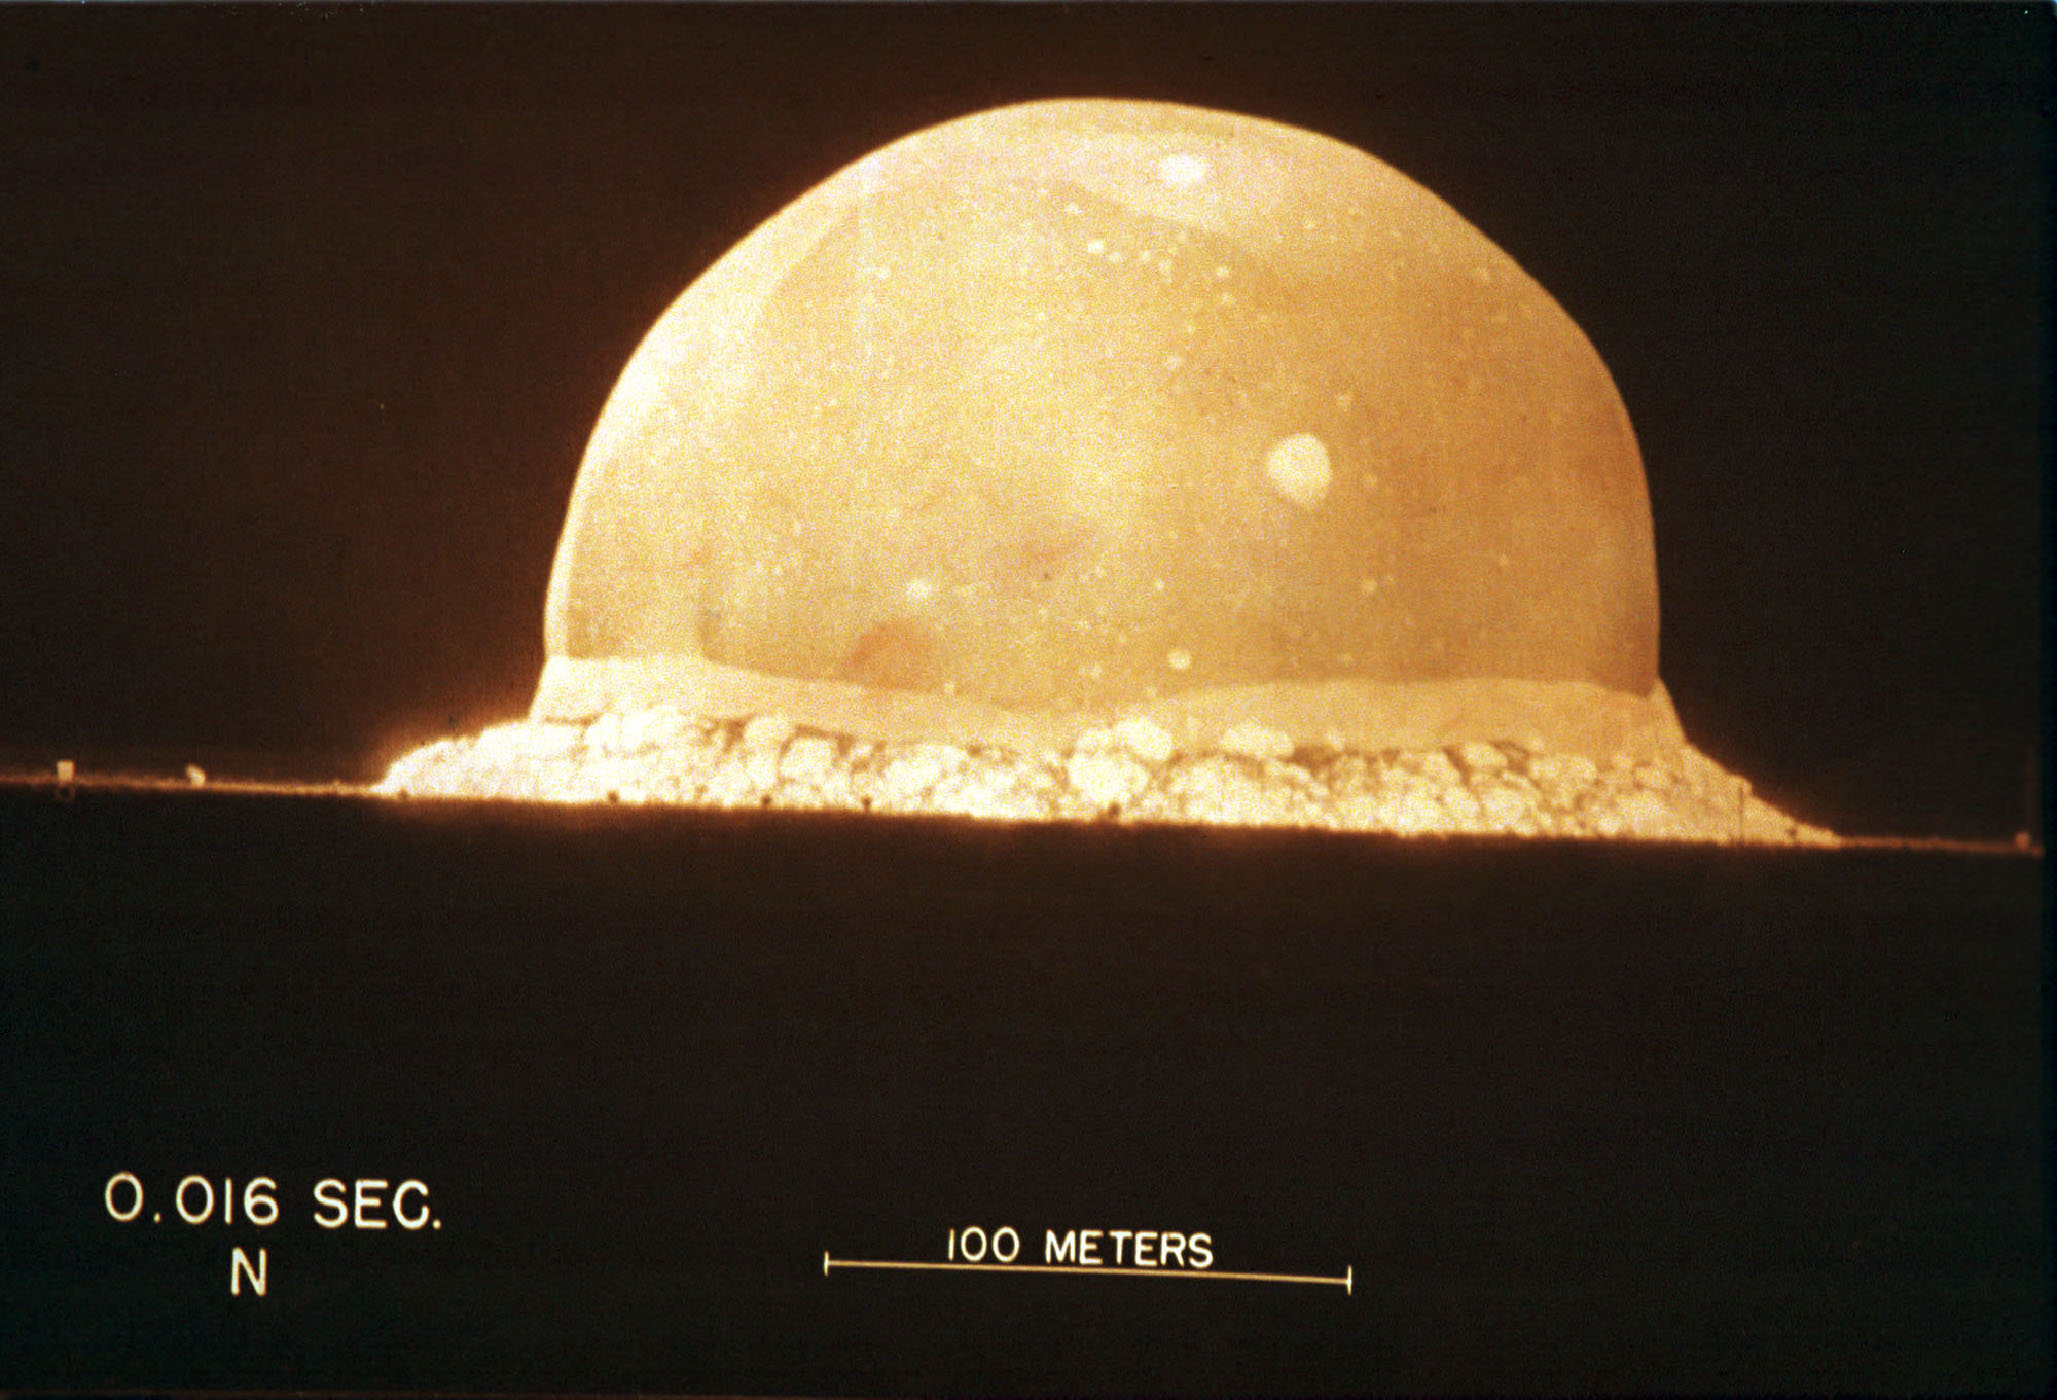 A photograph on display at The Bradbury Science Museum shows the first atomic bomb test on July 16, 1945, at Trinity Site in New Mexico.